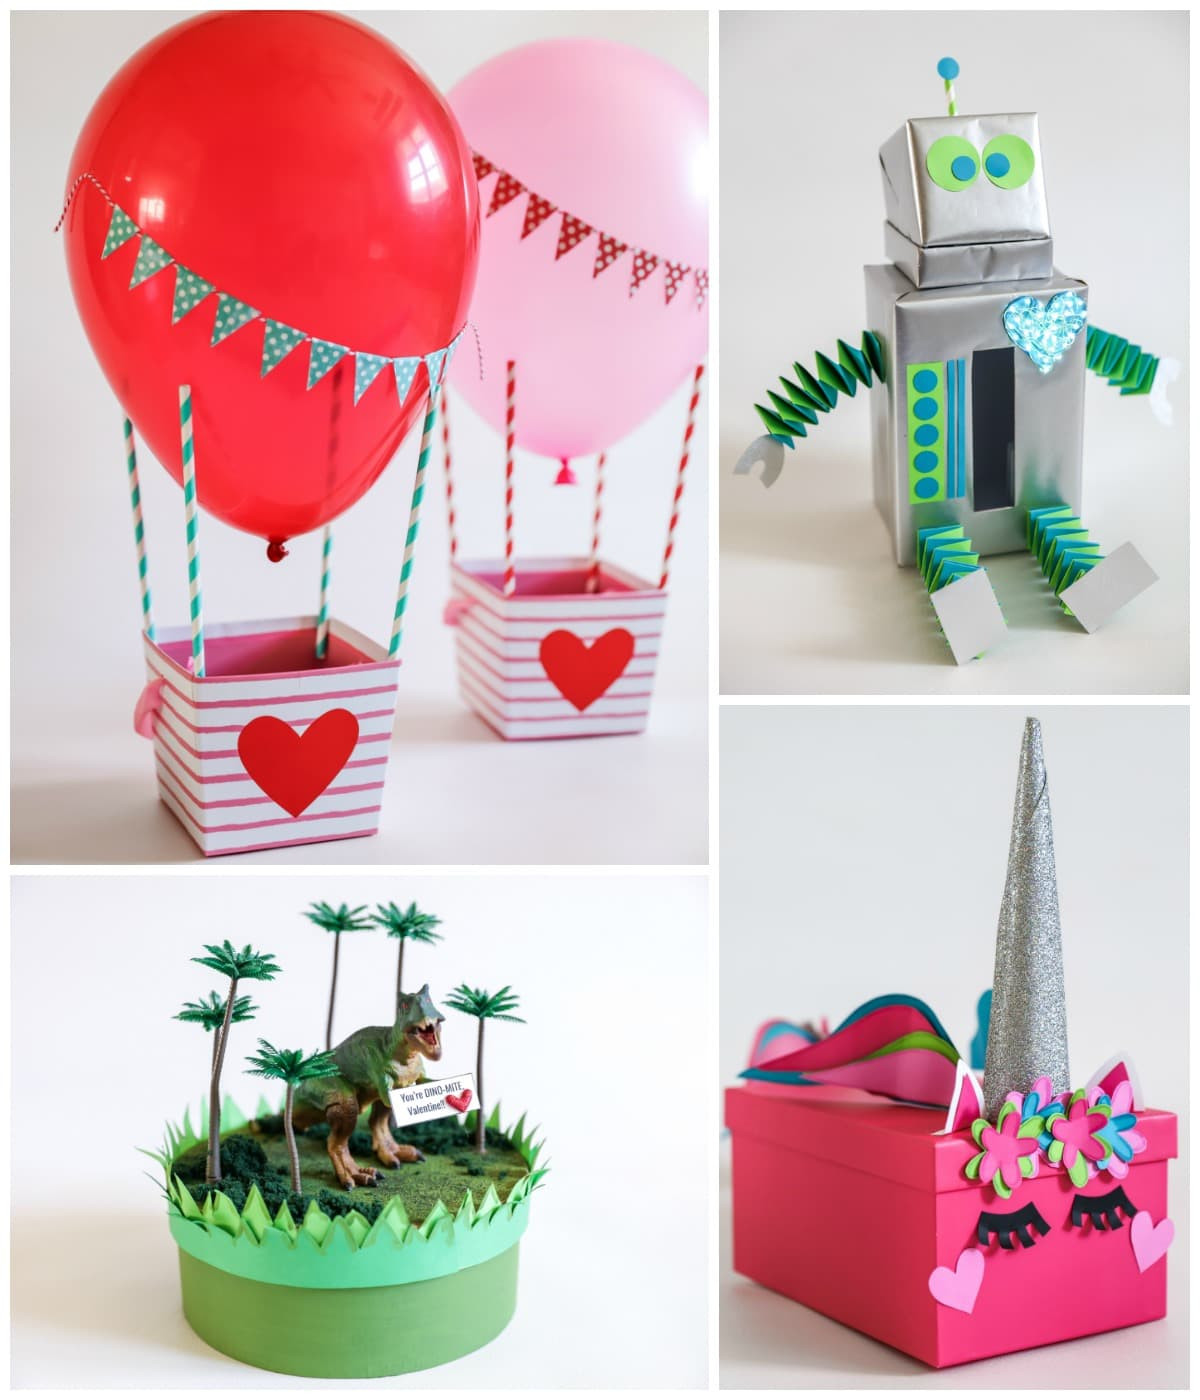 Valentines Day Boxes Ideas
 Valentines Box Ideas Step by Step Unicorn Robot & More